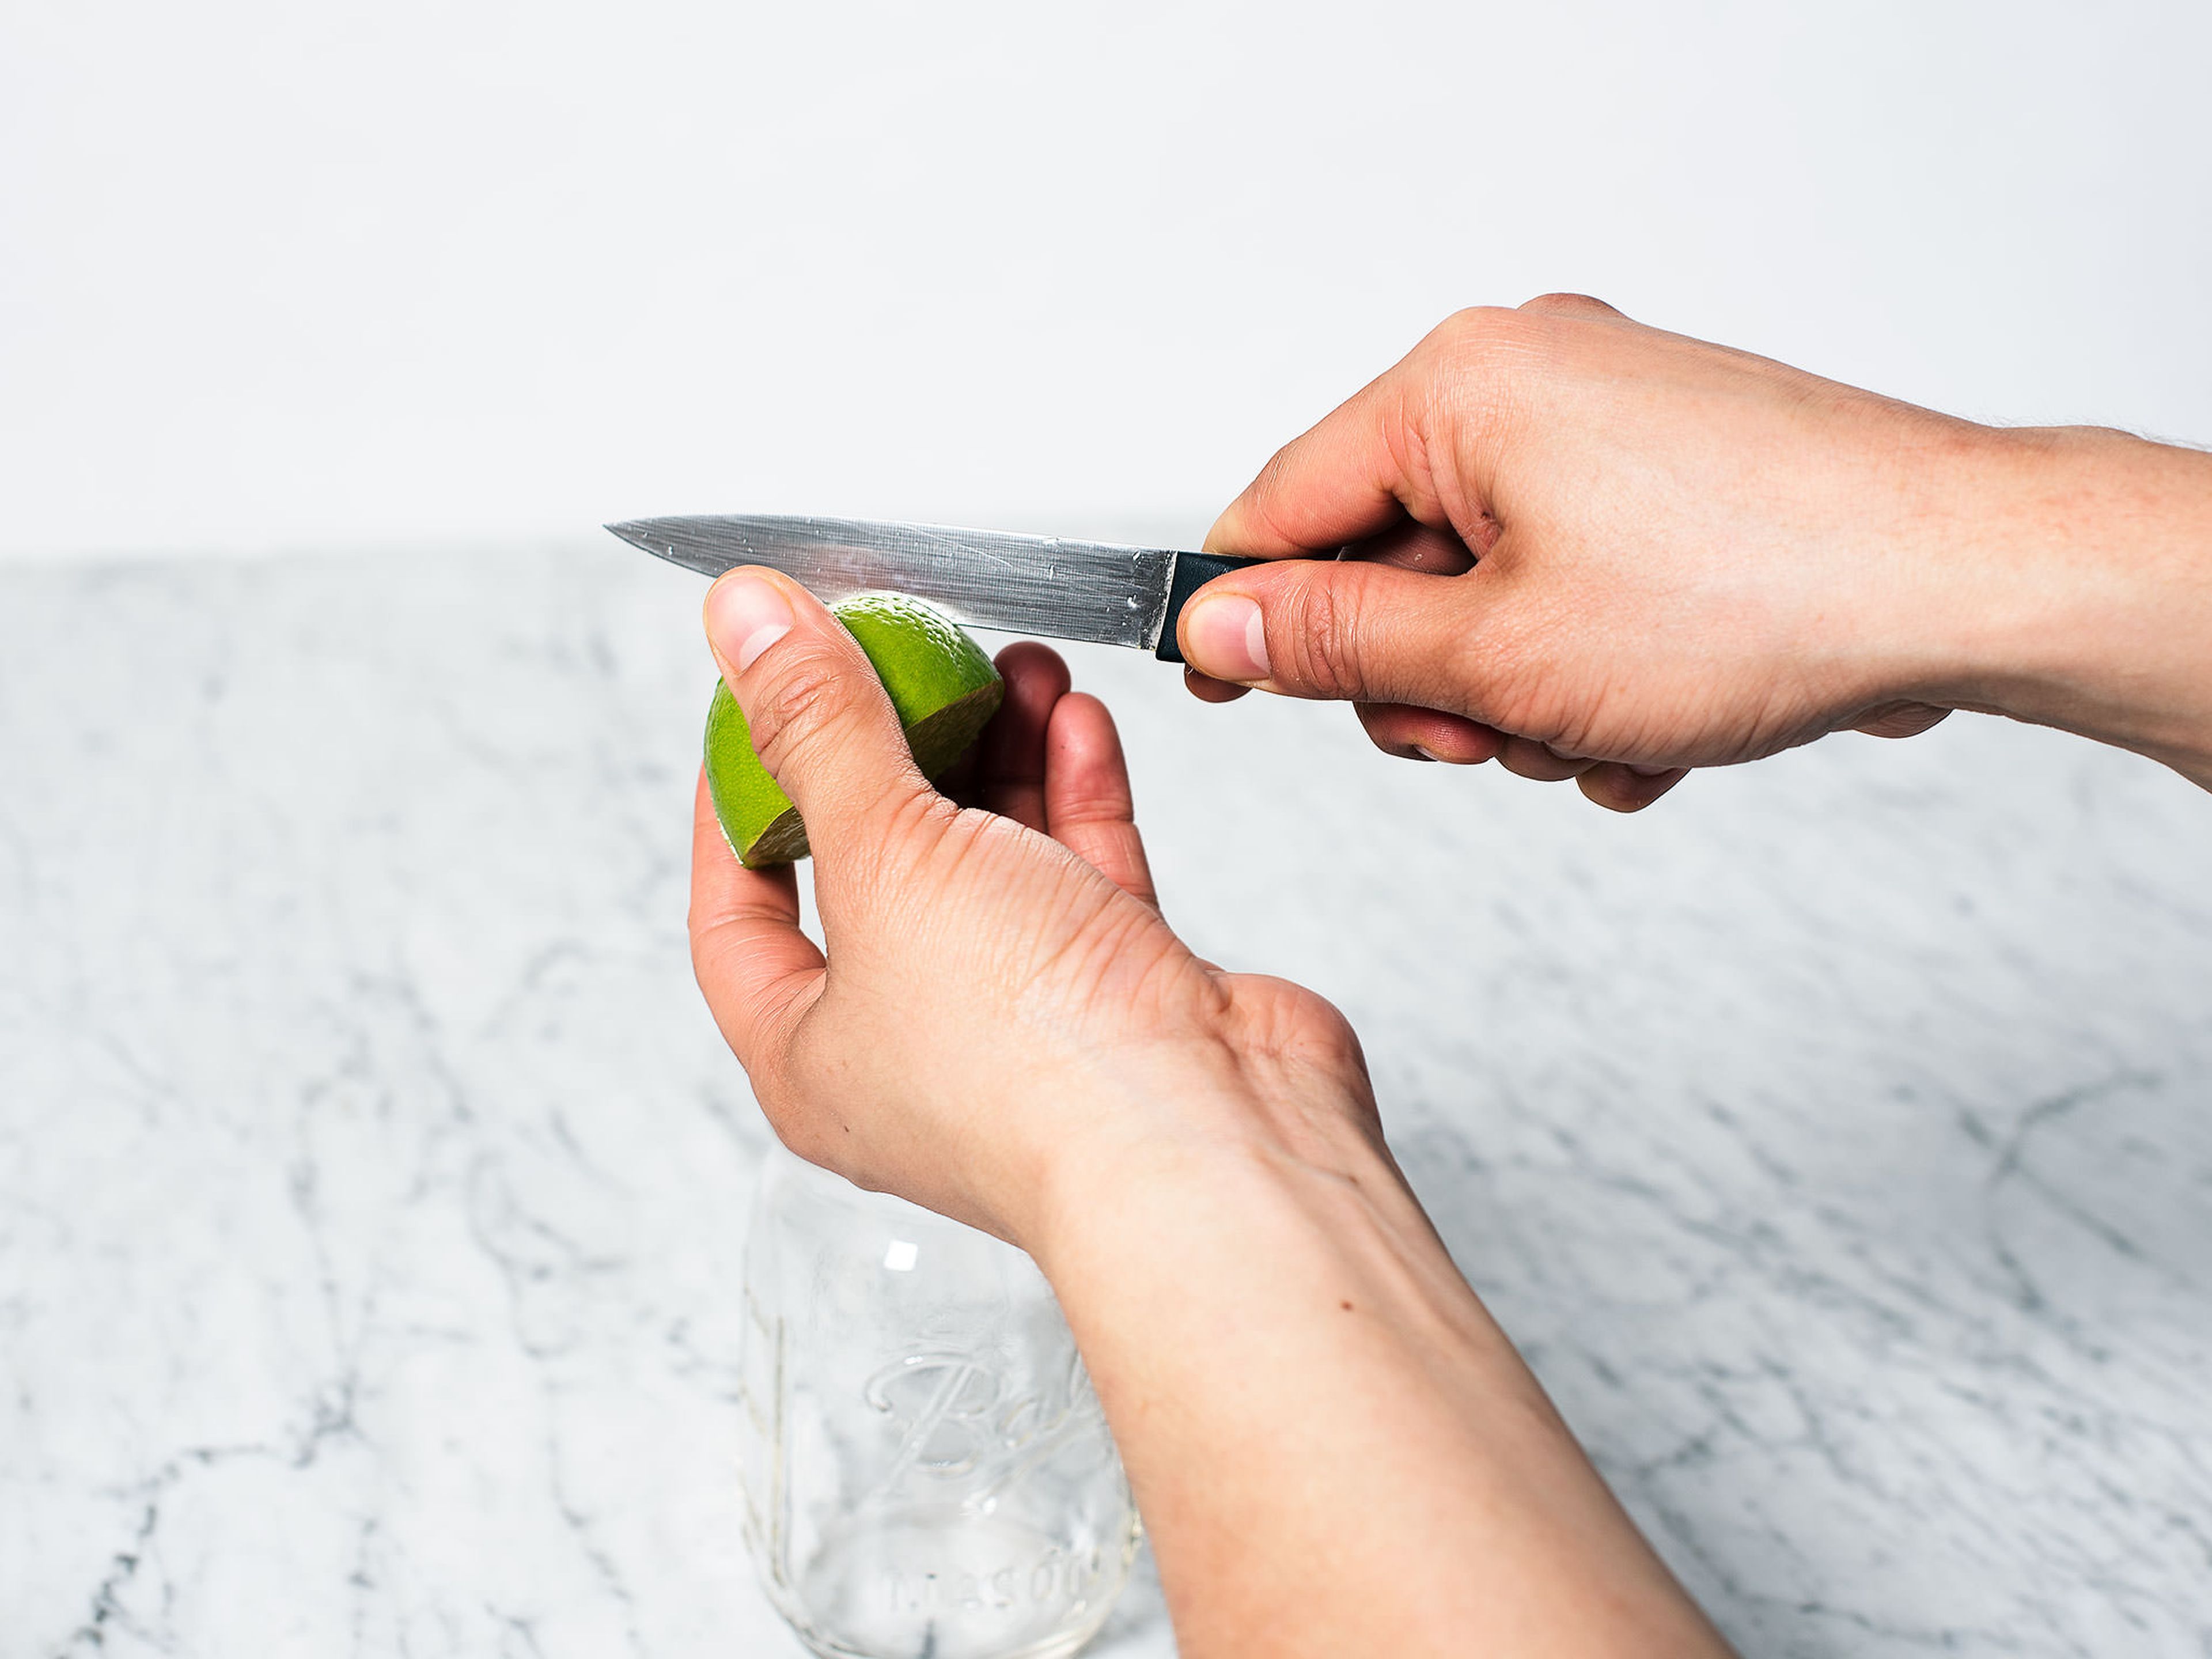 Remove seeds for lime half and score peel 3 times.